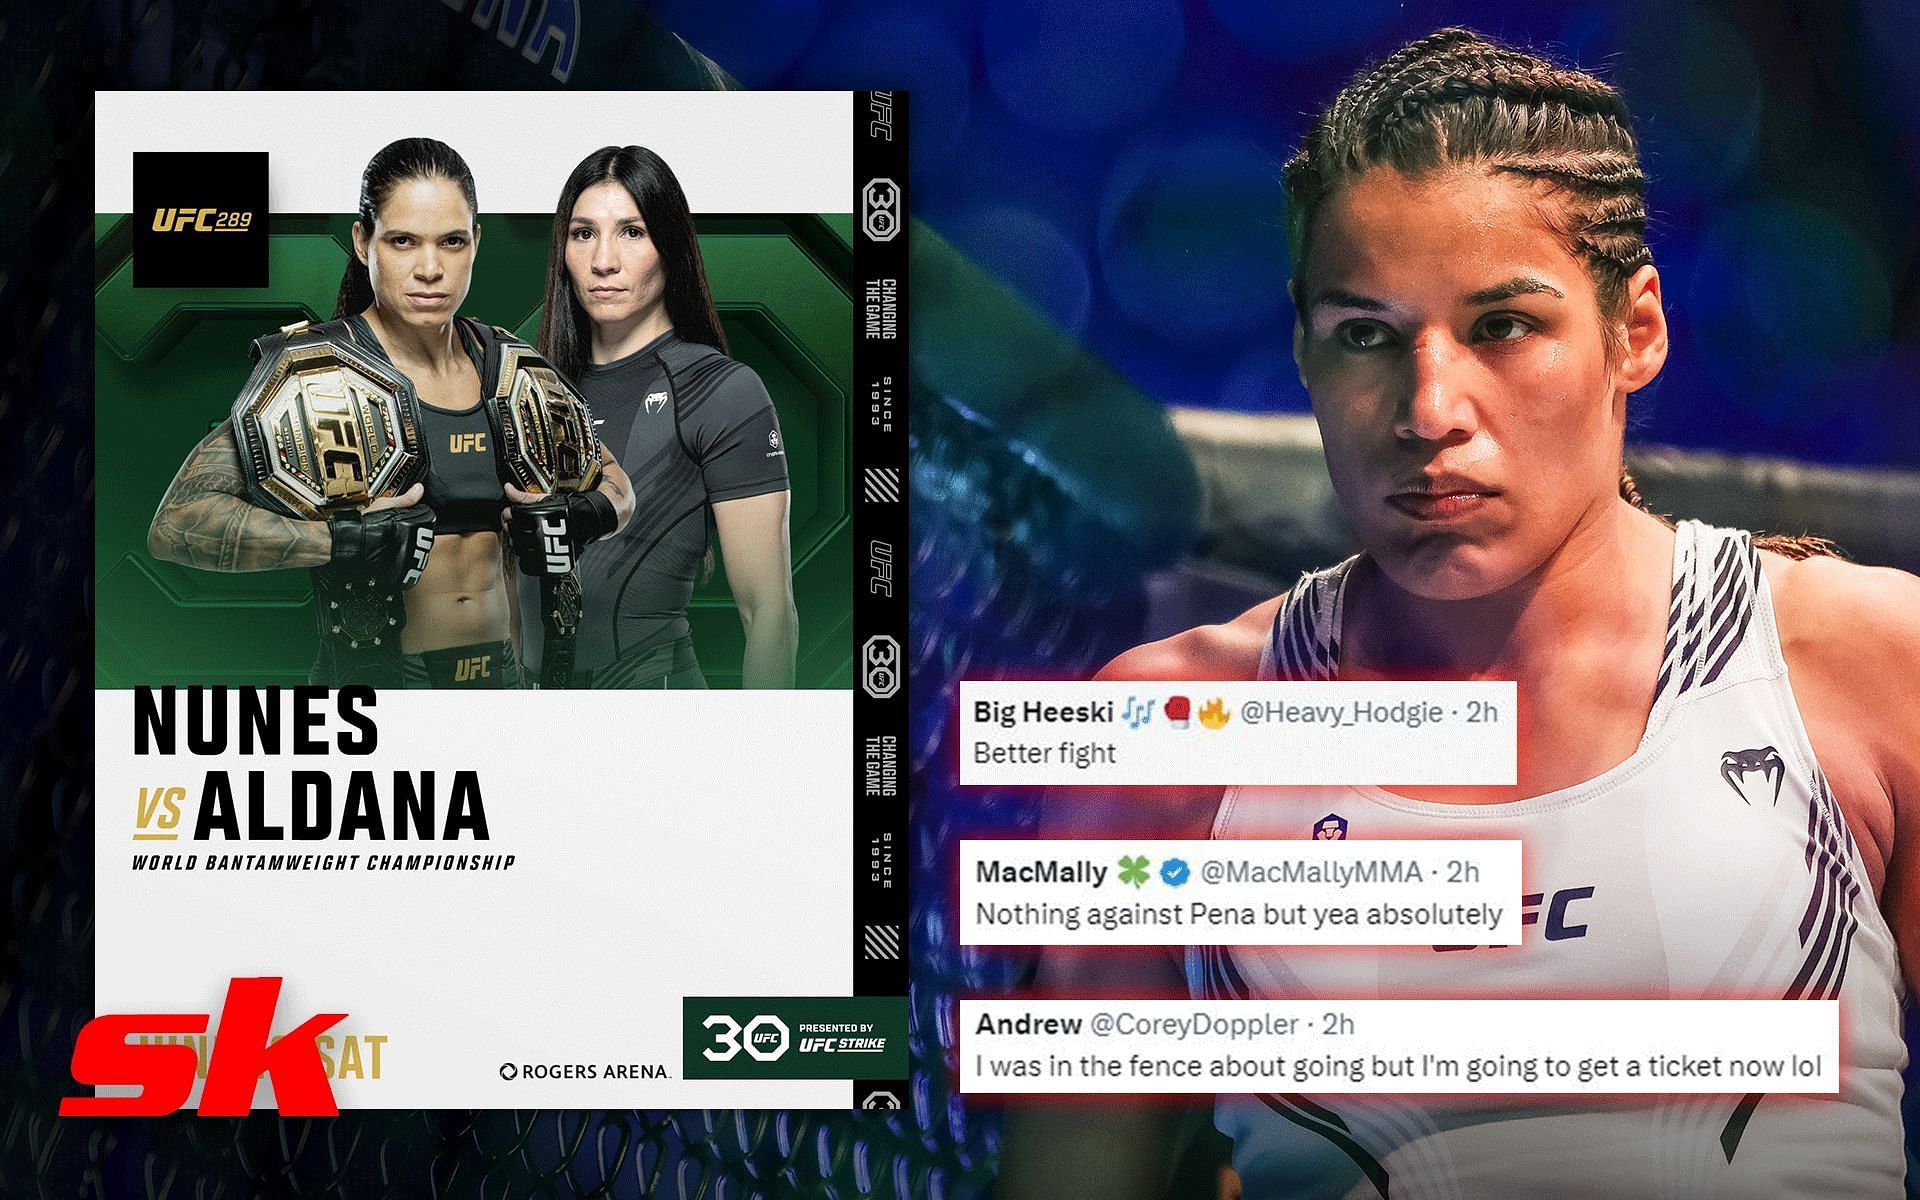 UFC 289 poster (left) and Julianna Pena (right) [Image credits: Getty Images and @ufc on Twitter ]